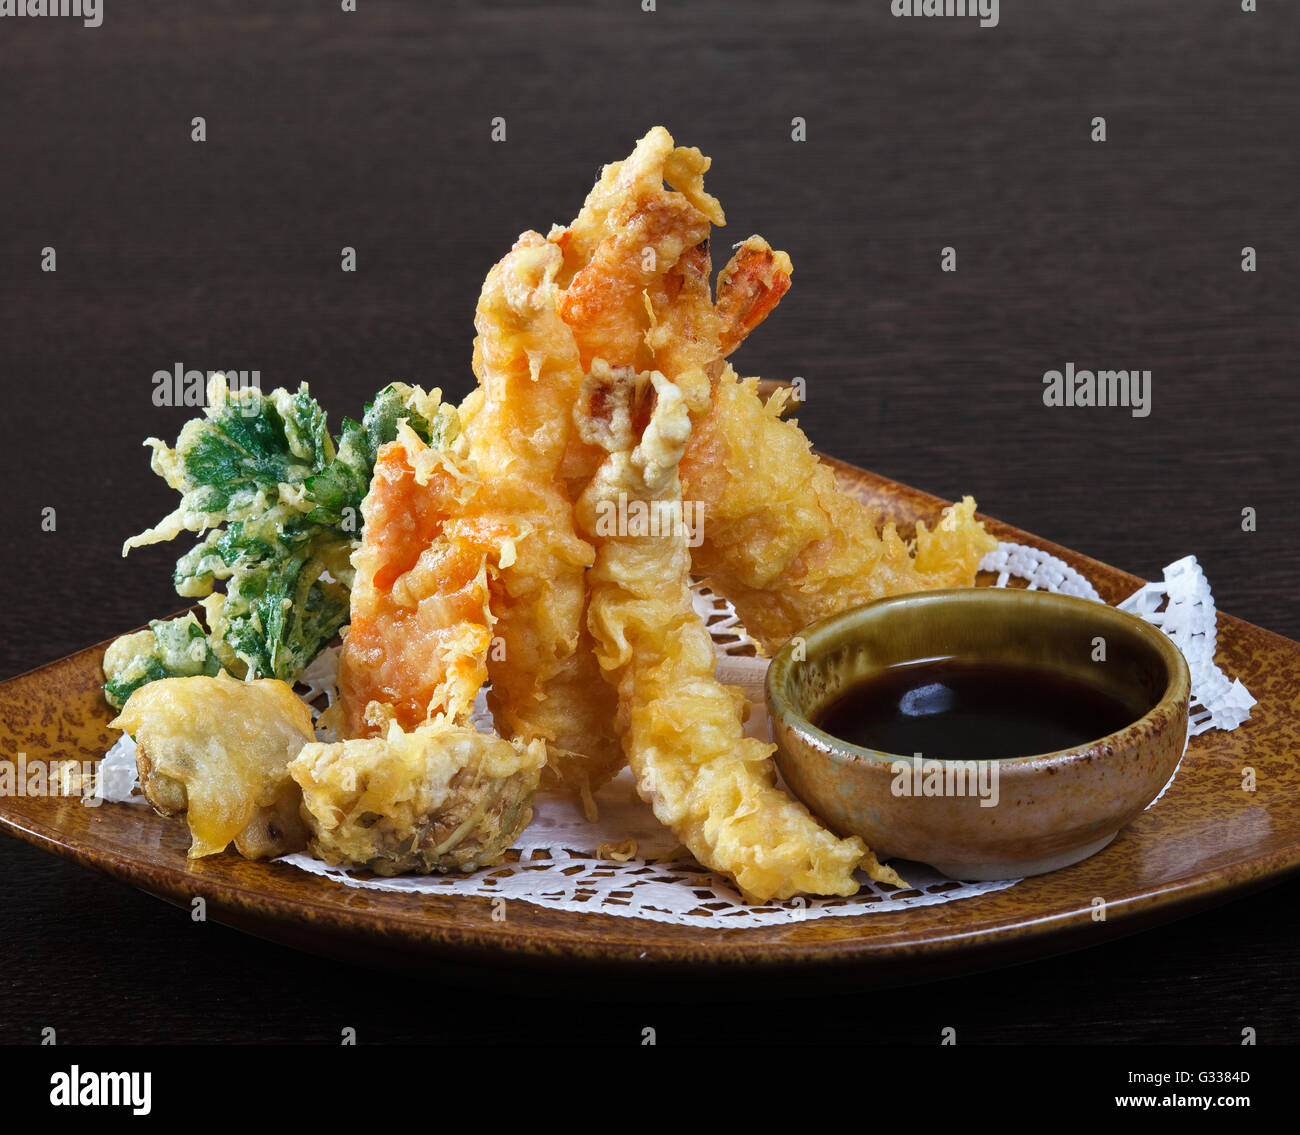 Tempura shrimps (deep fried shrimps) with soy sauce. Decorating dish of Japanese and Asian cuisine. Close up side view. Stock Photo